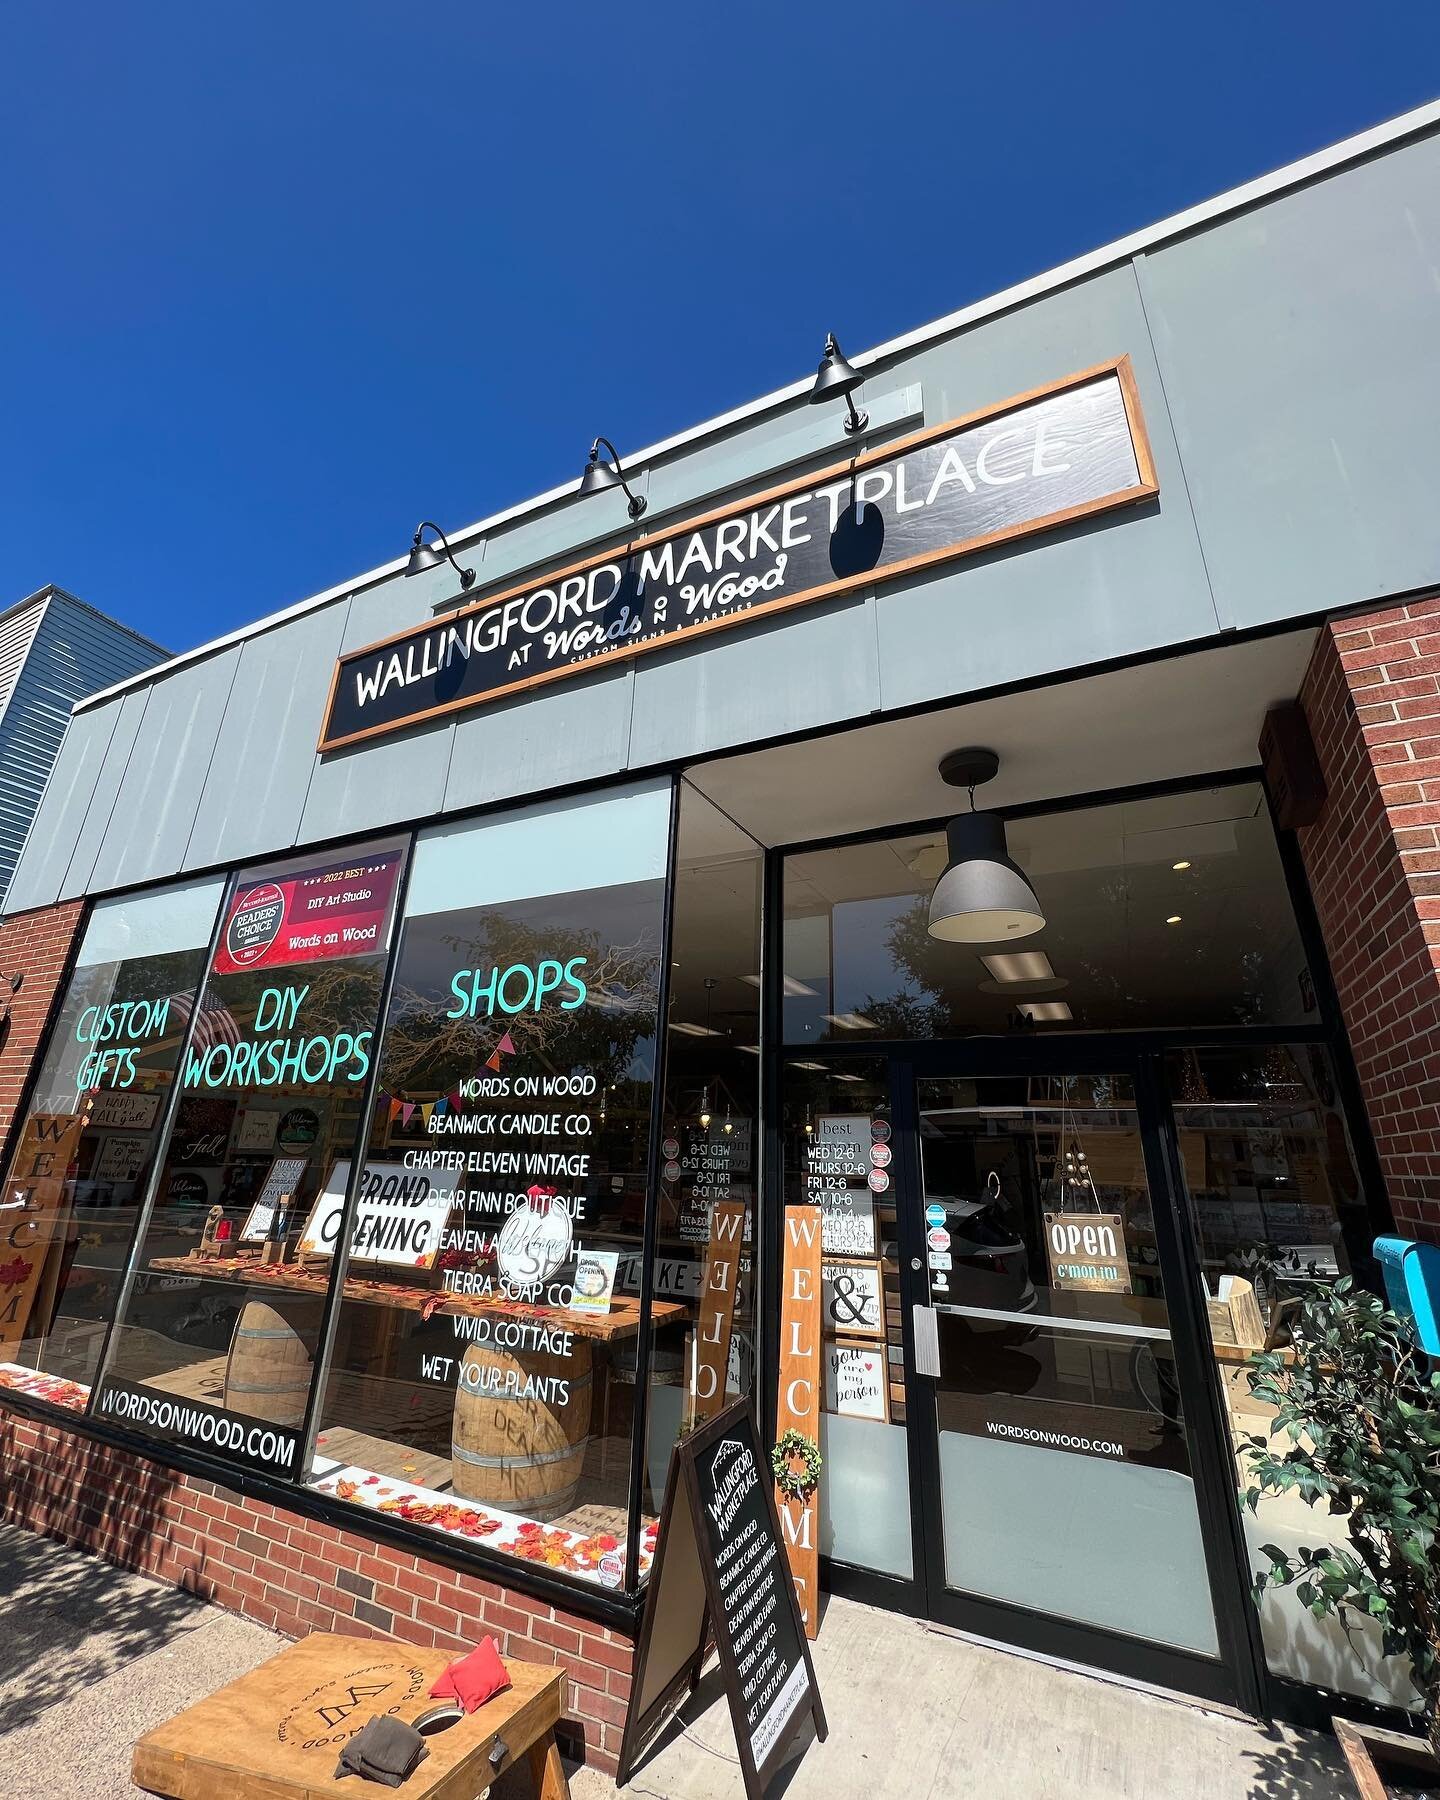 Stop by and shop at the Wallingford Marketplace this weekend! We&rsquo;re open Saturday 10-6 and Sunday 10-4 🛍️ 

-
-
#wallingfordct #ctlocal #wallingfordmarketplace #connecticutsmallbusiness #203local #thingstodoct